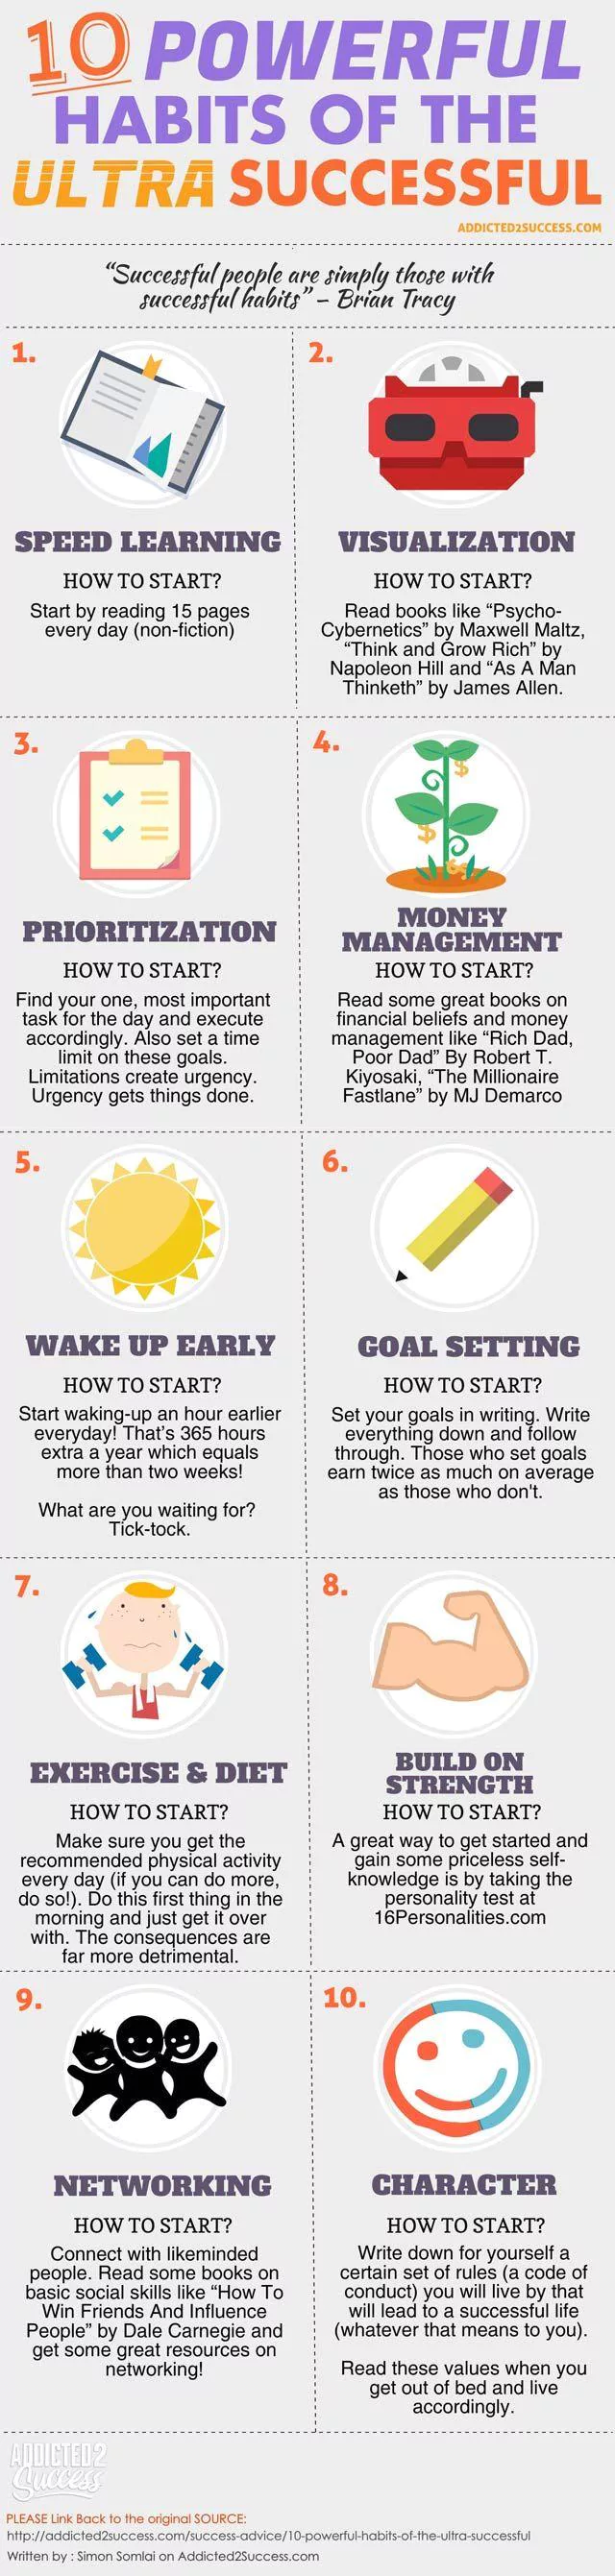 10 Powerful Habits Of The Ultra Successful